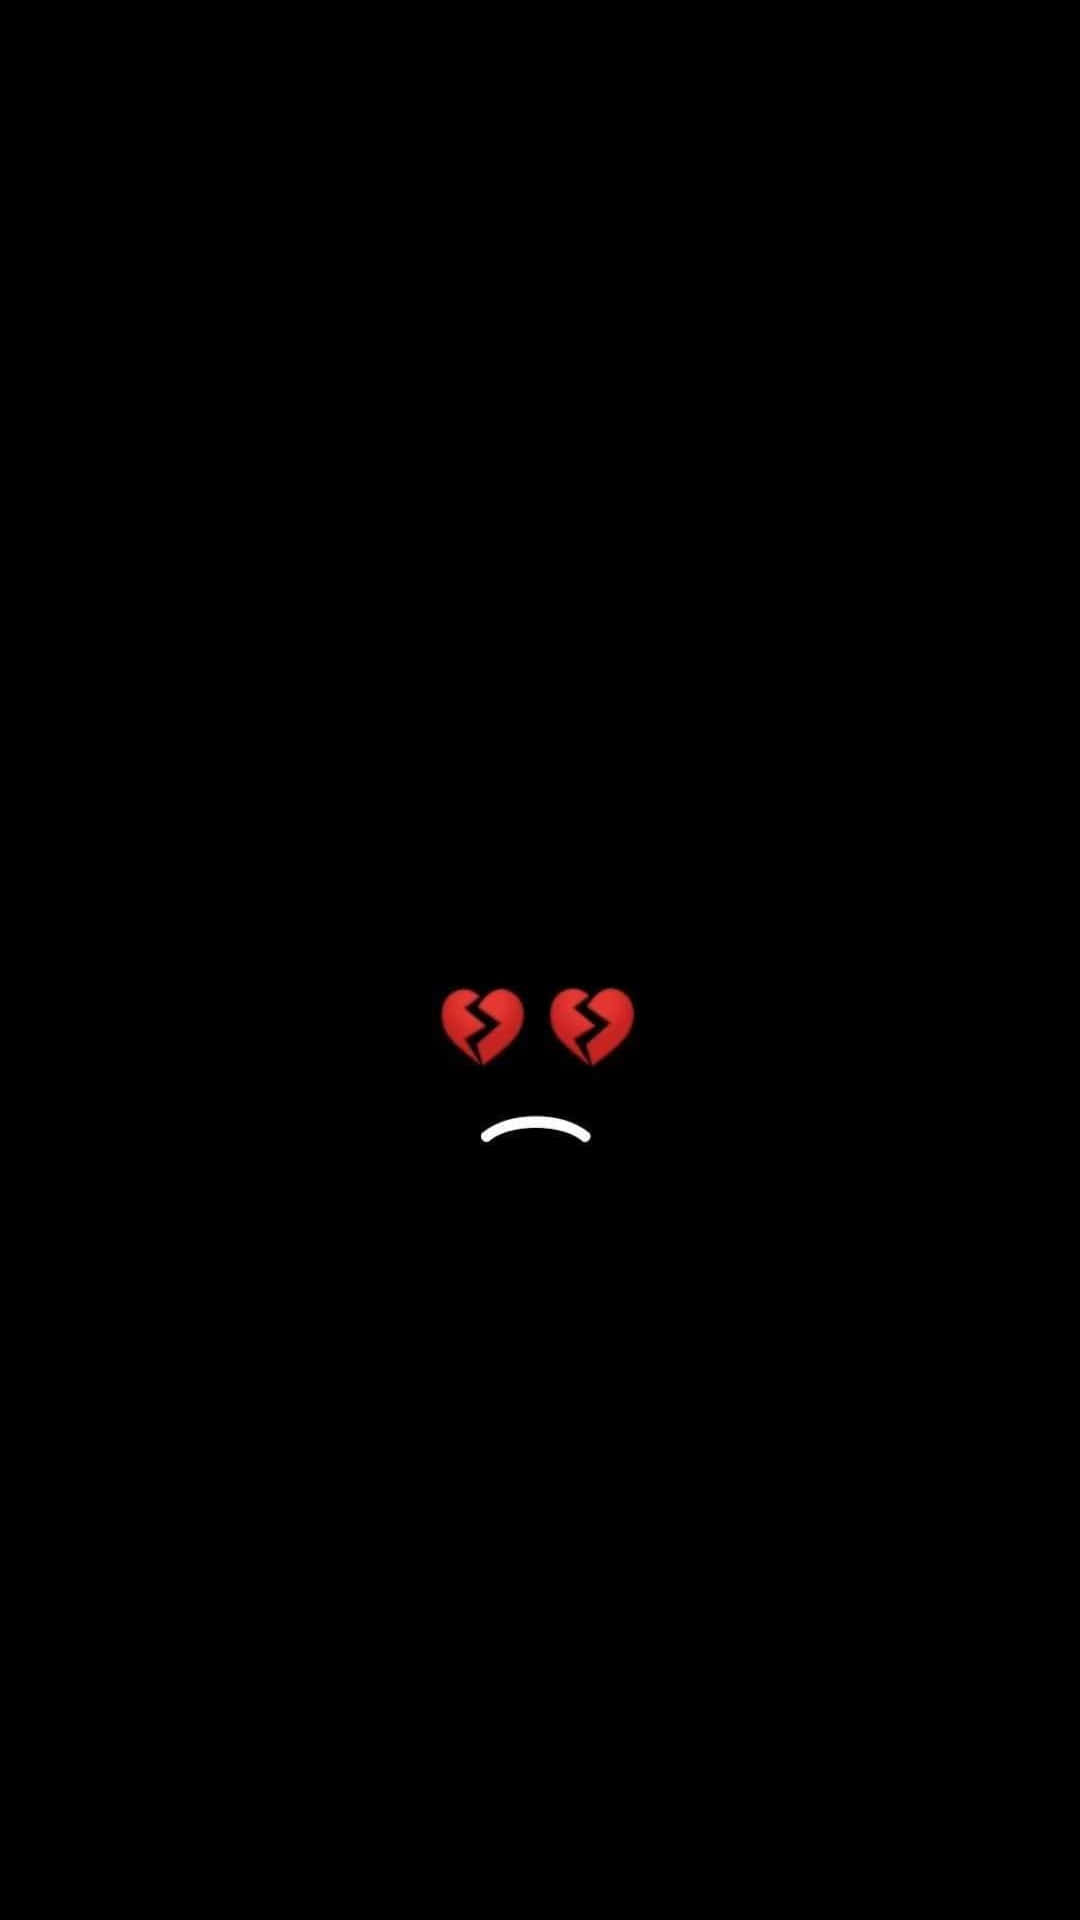 Download A Black Background With A Sad Face On It Wallpaper ...